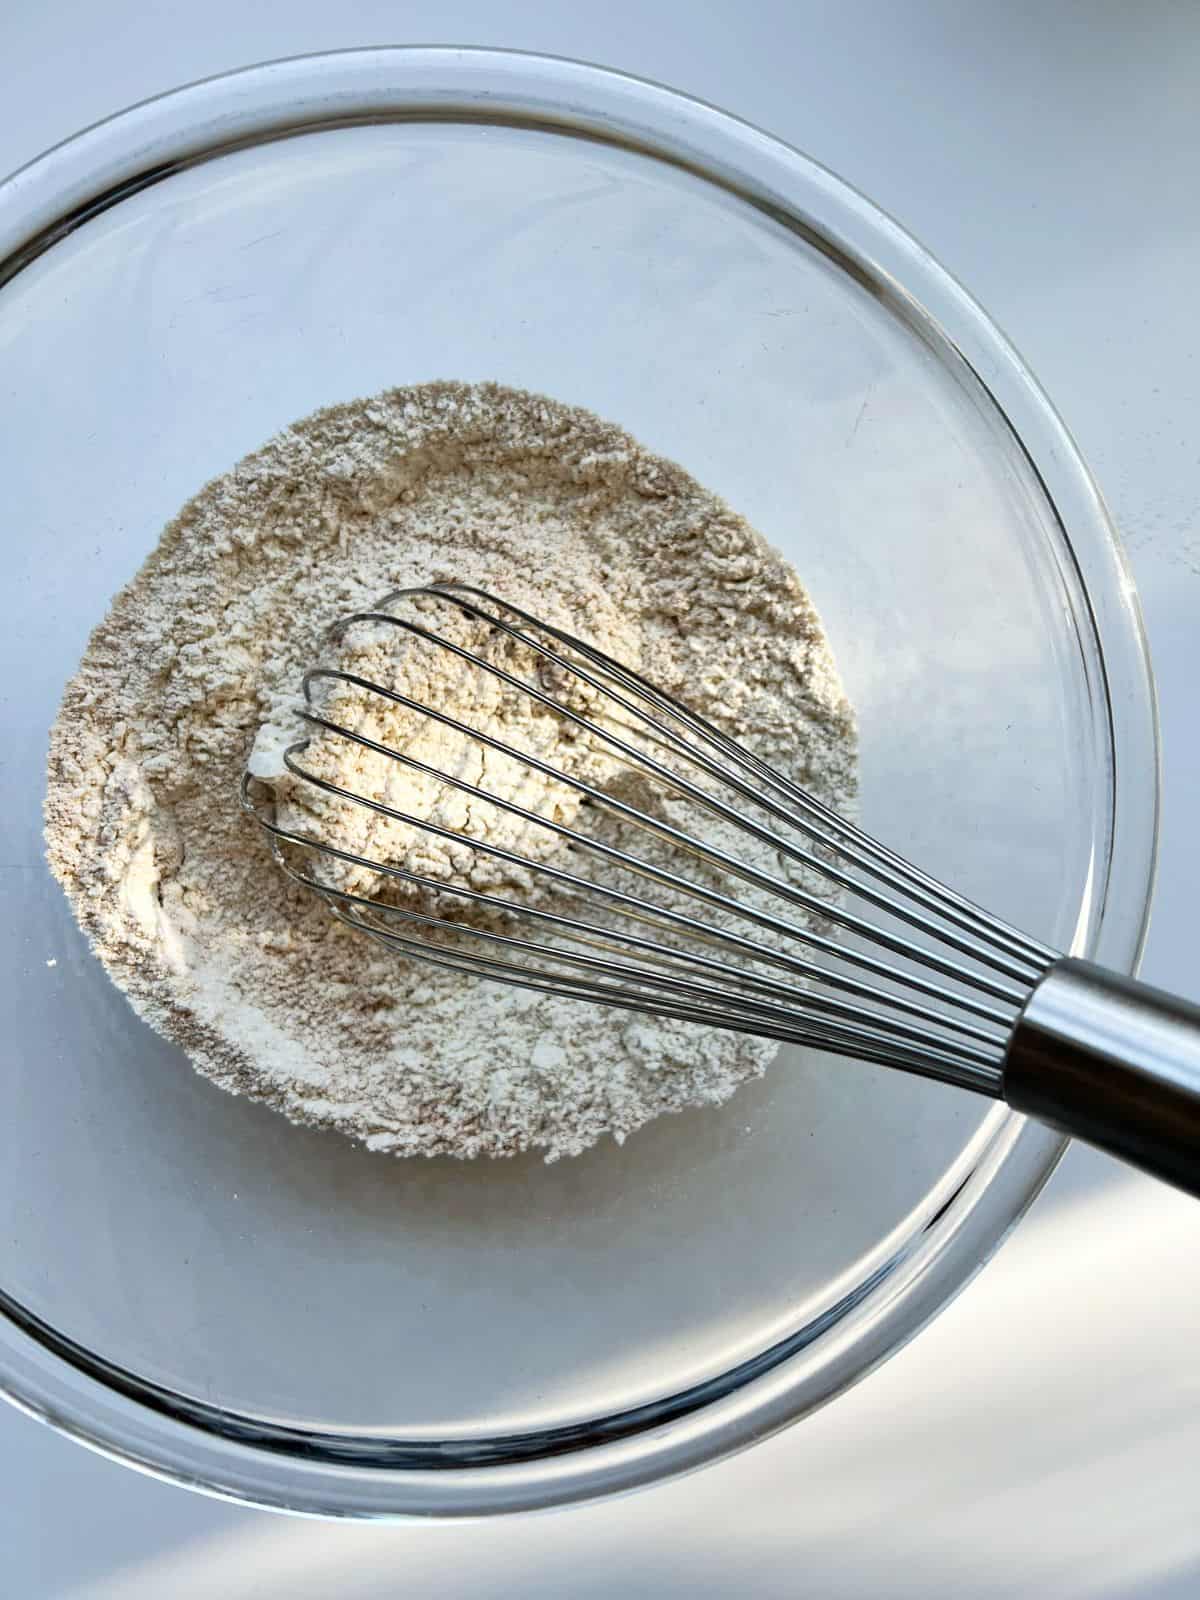 An image of the dry ingredients need for the recipe, in a glass bowl with a wire whisk.